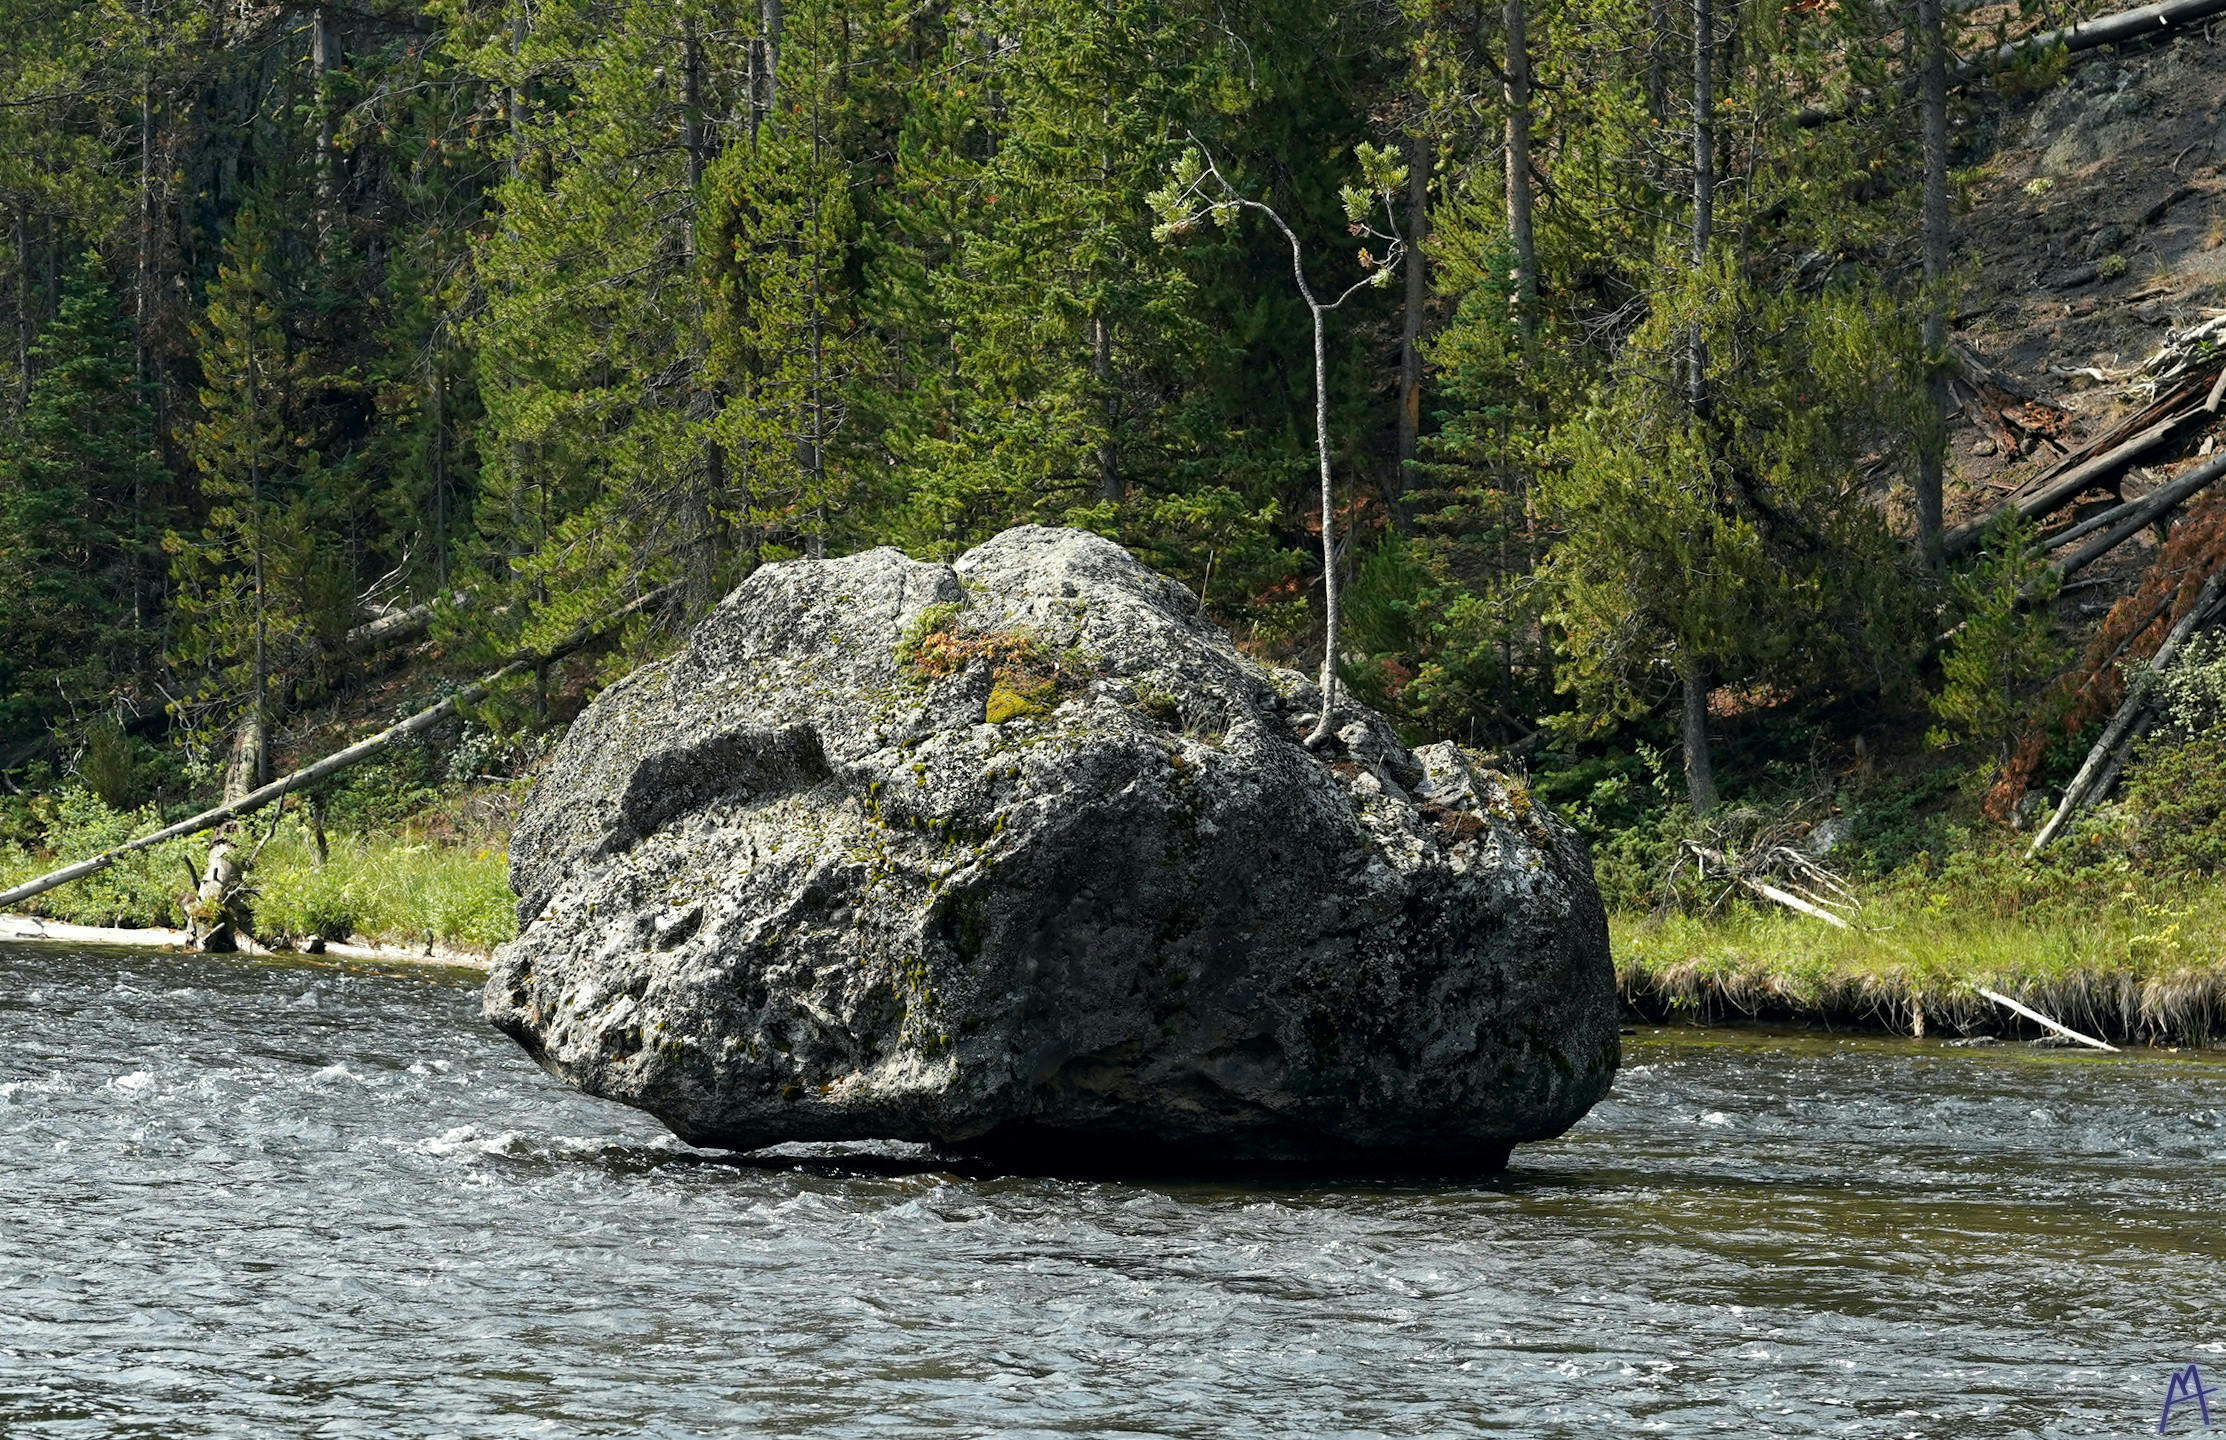 A small tree growing on a rock in a river at Yellowstone